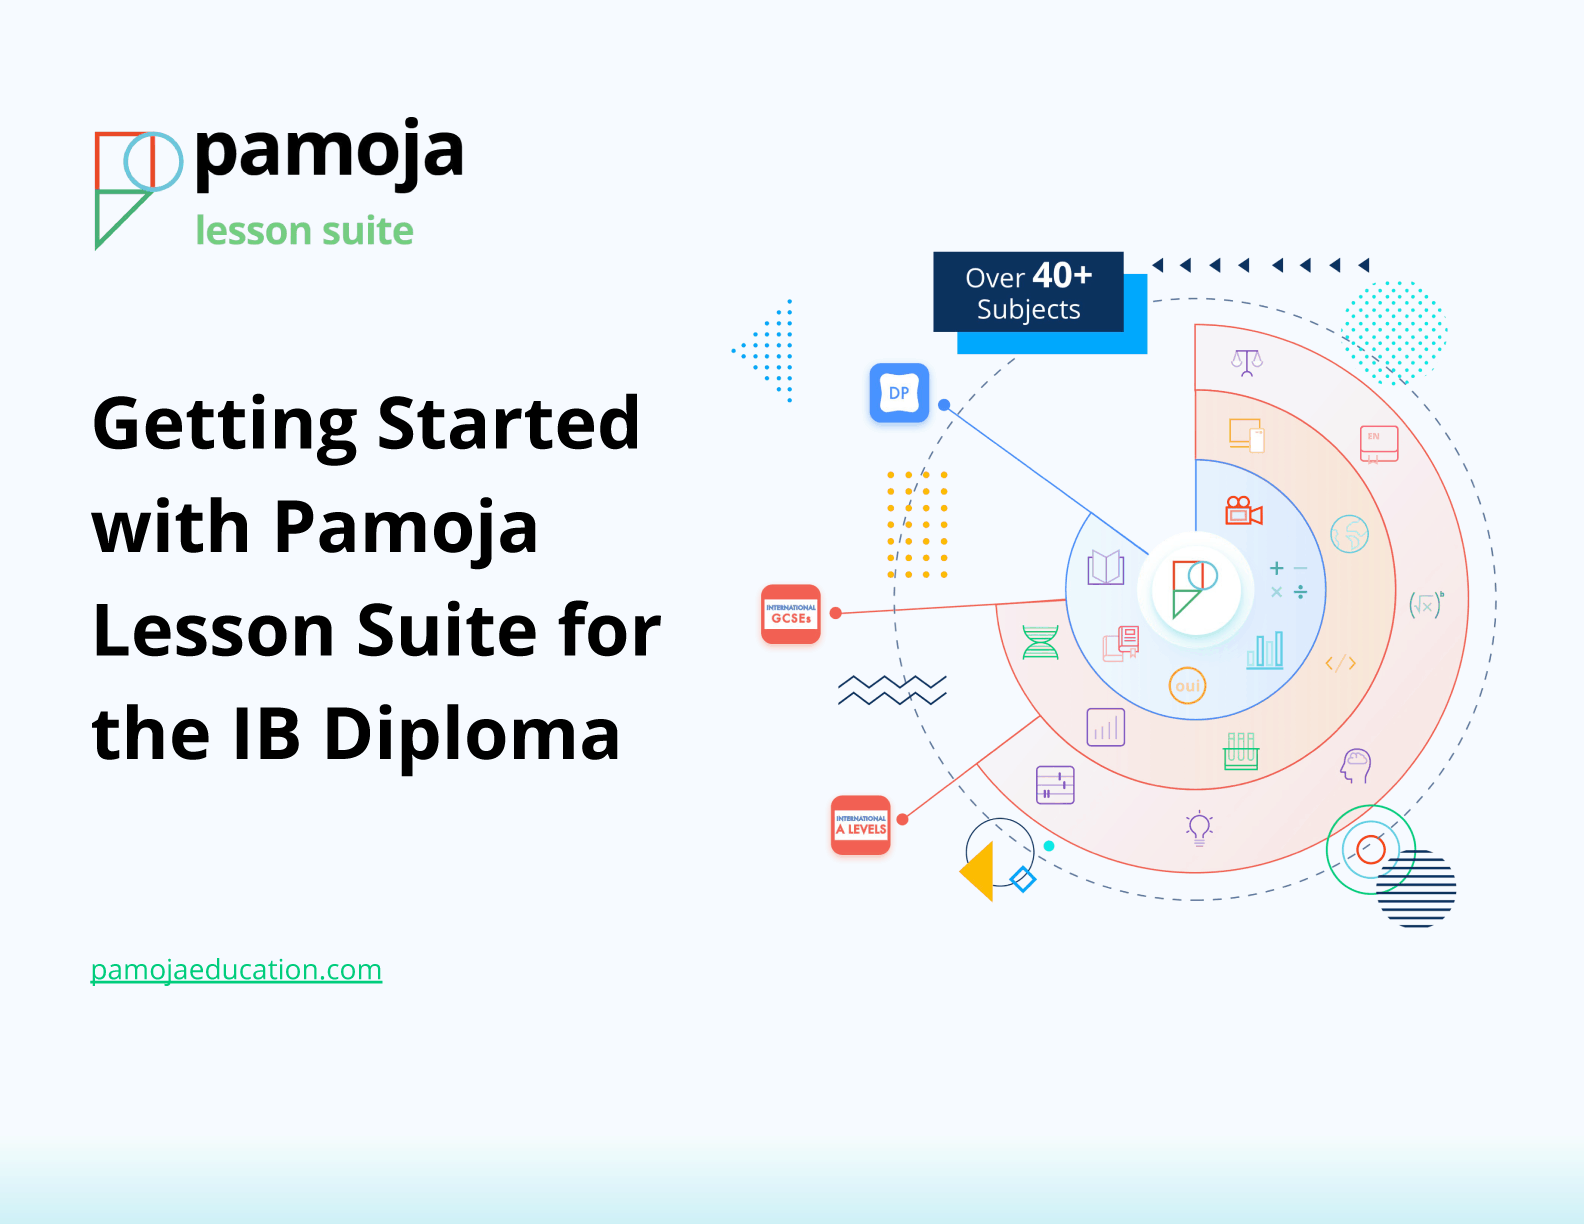 Getting Started with Pamoja Lesson Suite for the IB Diploma